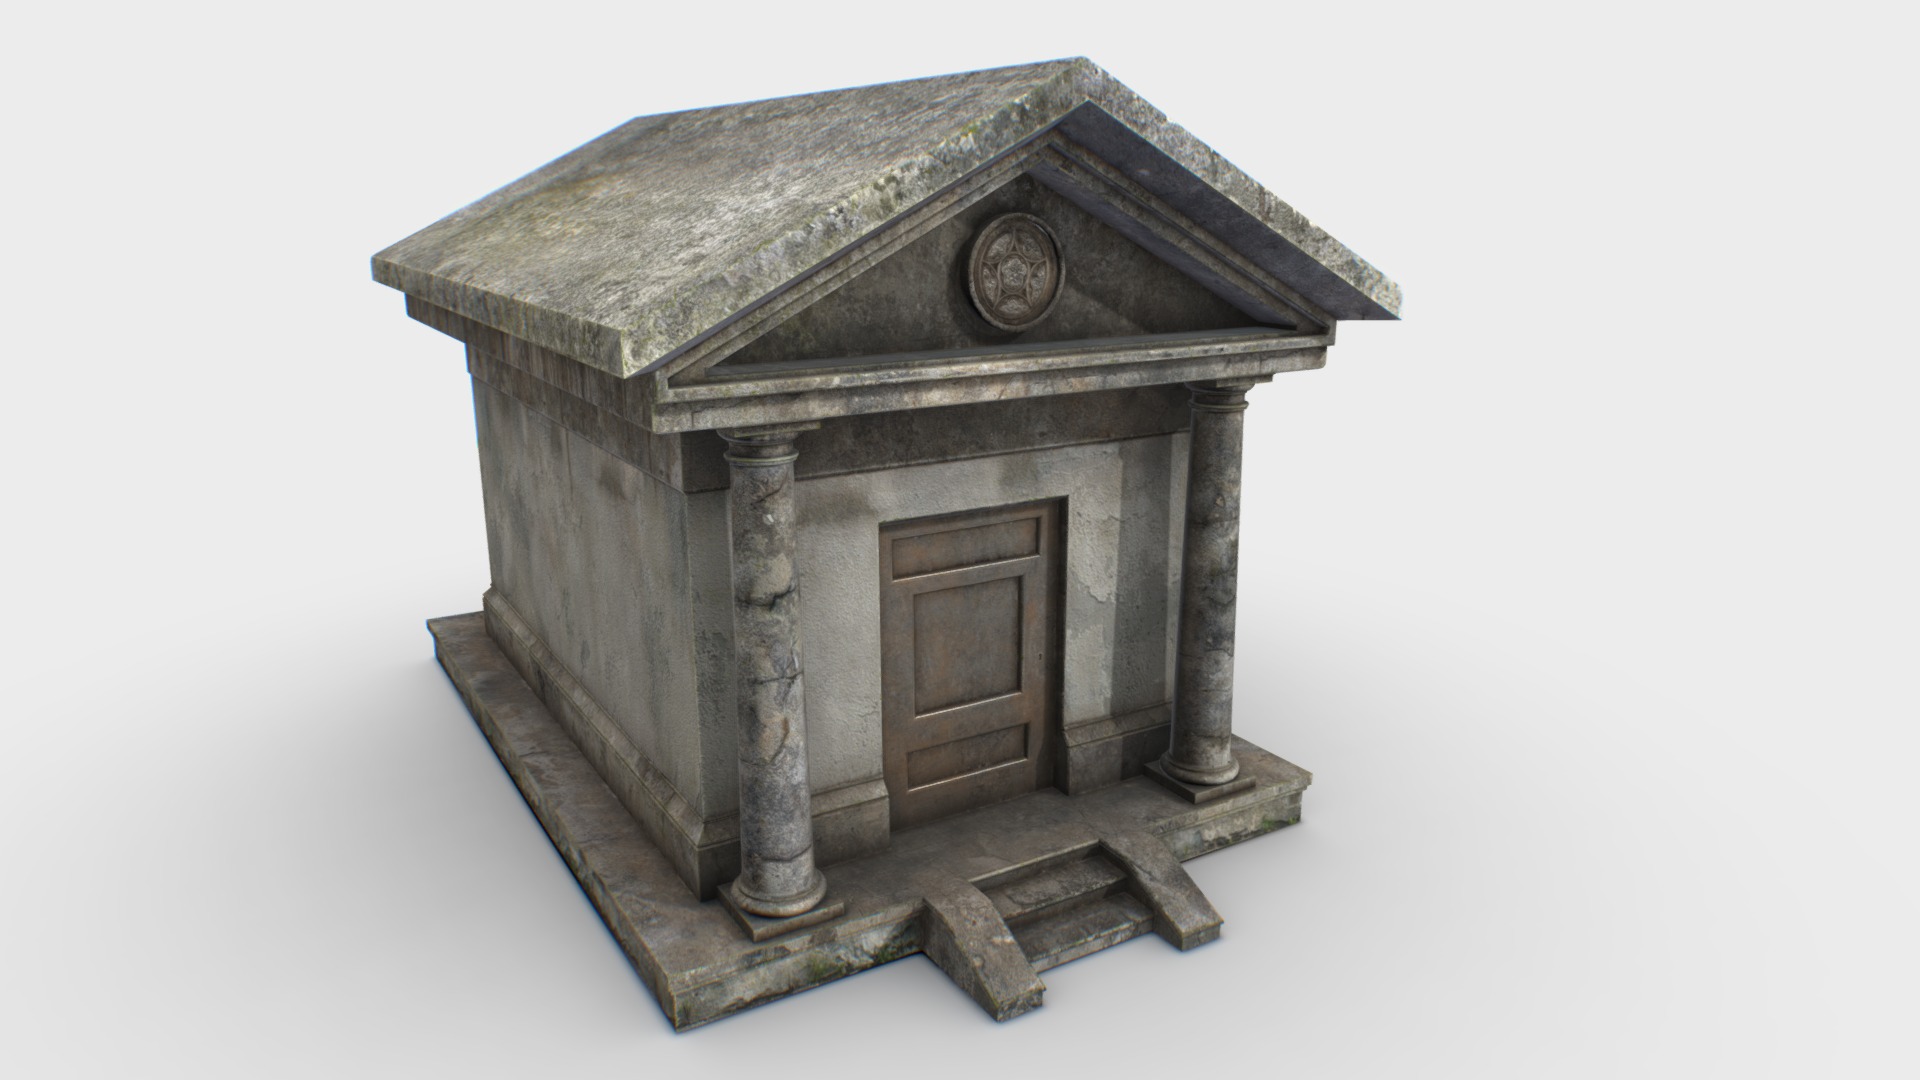 3D model Mausoleum PBR - This is a 3D model of the Mausoleum PBR. The 3D model is about a wooden chest with a clock on it.